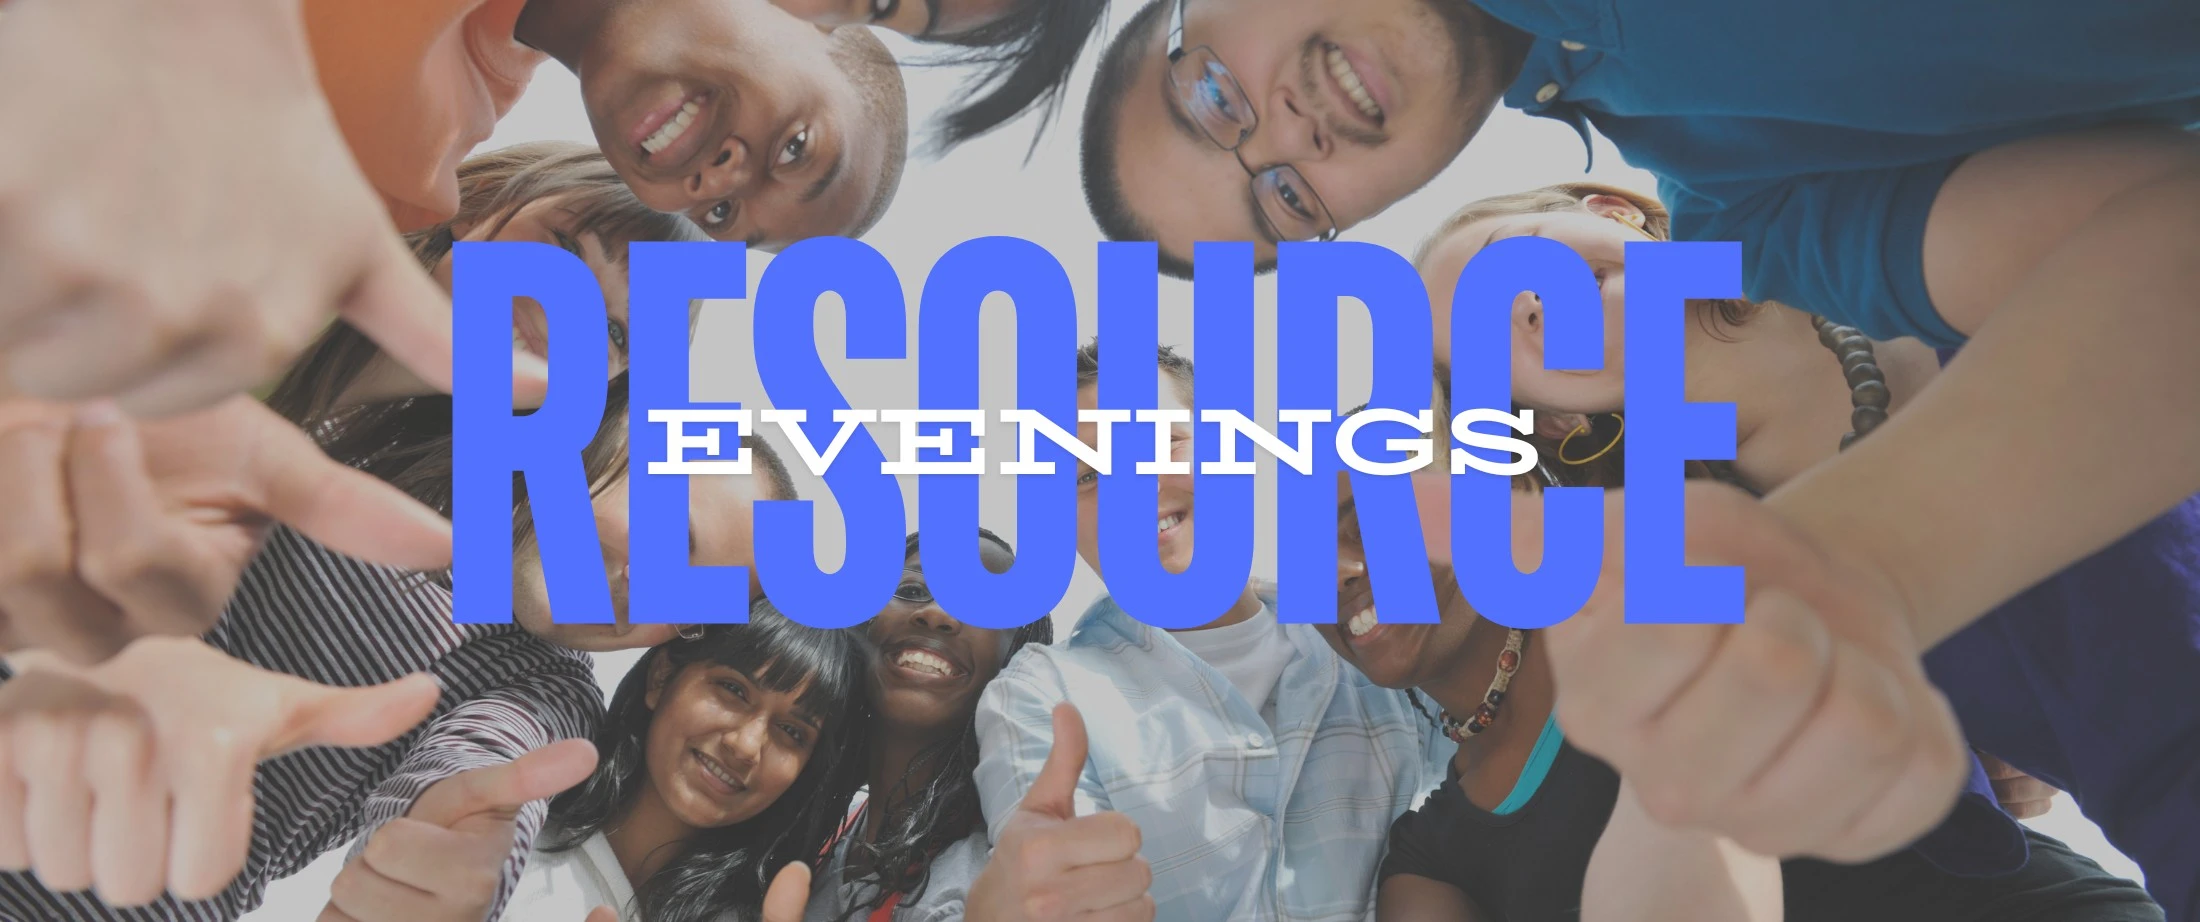 Youth and Children's Leaders Resource Evenings